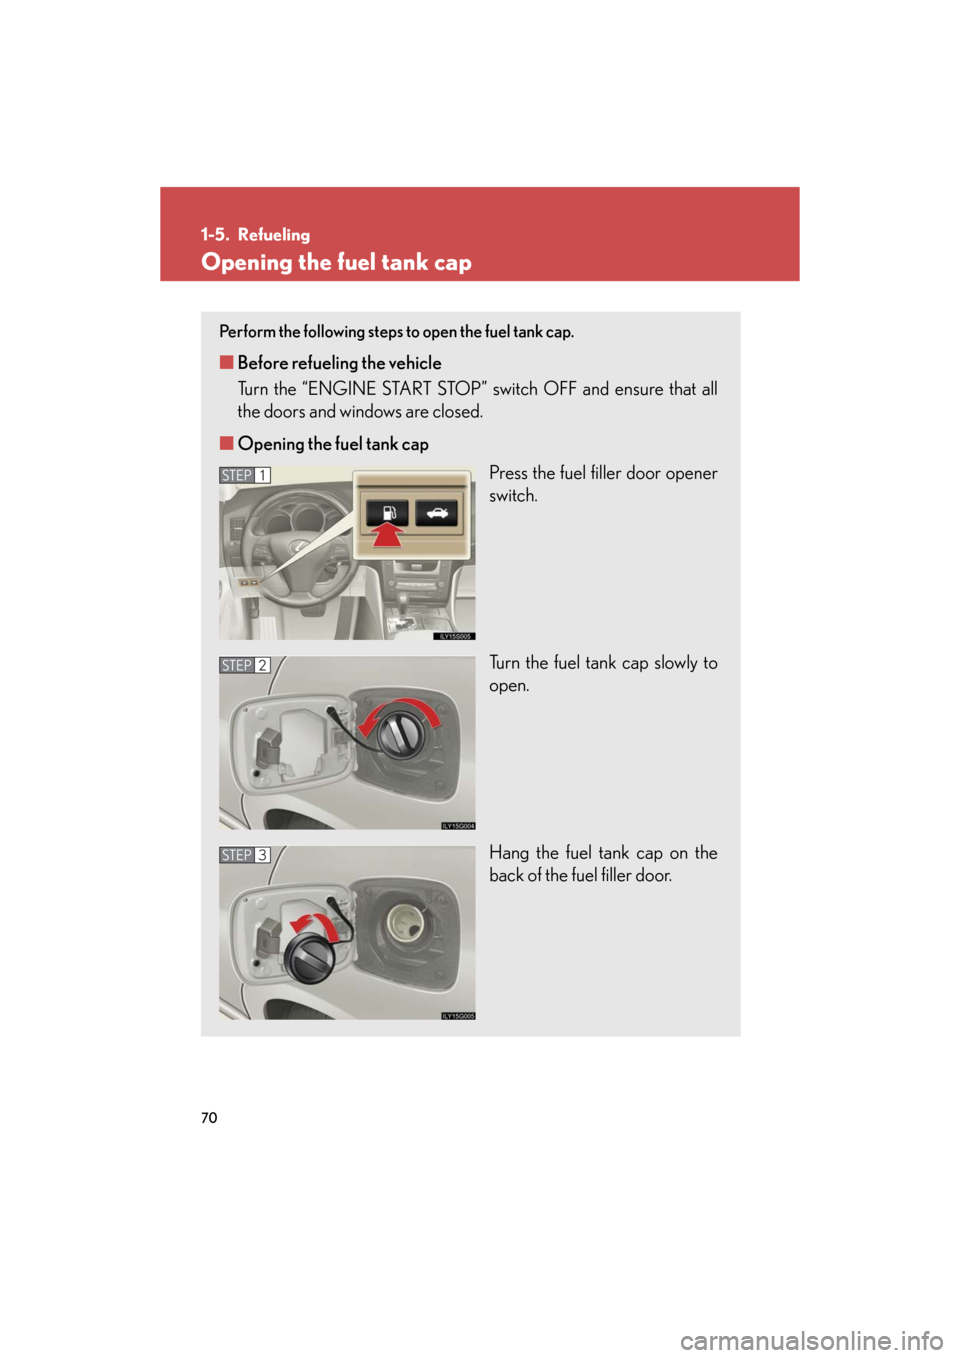 Lexus GS350 2008  Do-it-yourself maintenance / LEXUS 2008 GS460/350 OWNERS MANUAL (OM30A87U) 70
GS_G_U
May 13, 2008 5:14 pm
1-5. Refueling
Opening the fuel tank cap
Perform the following steps to open the fuel tank cap. 
■Before refueling the vehicle
Turn the “ENGINE START STOP” sw itch